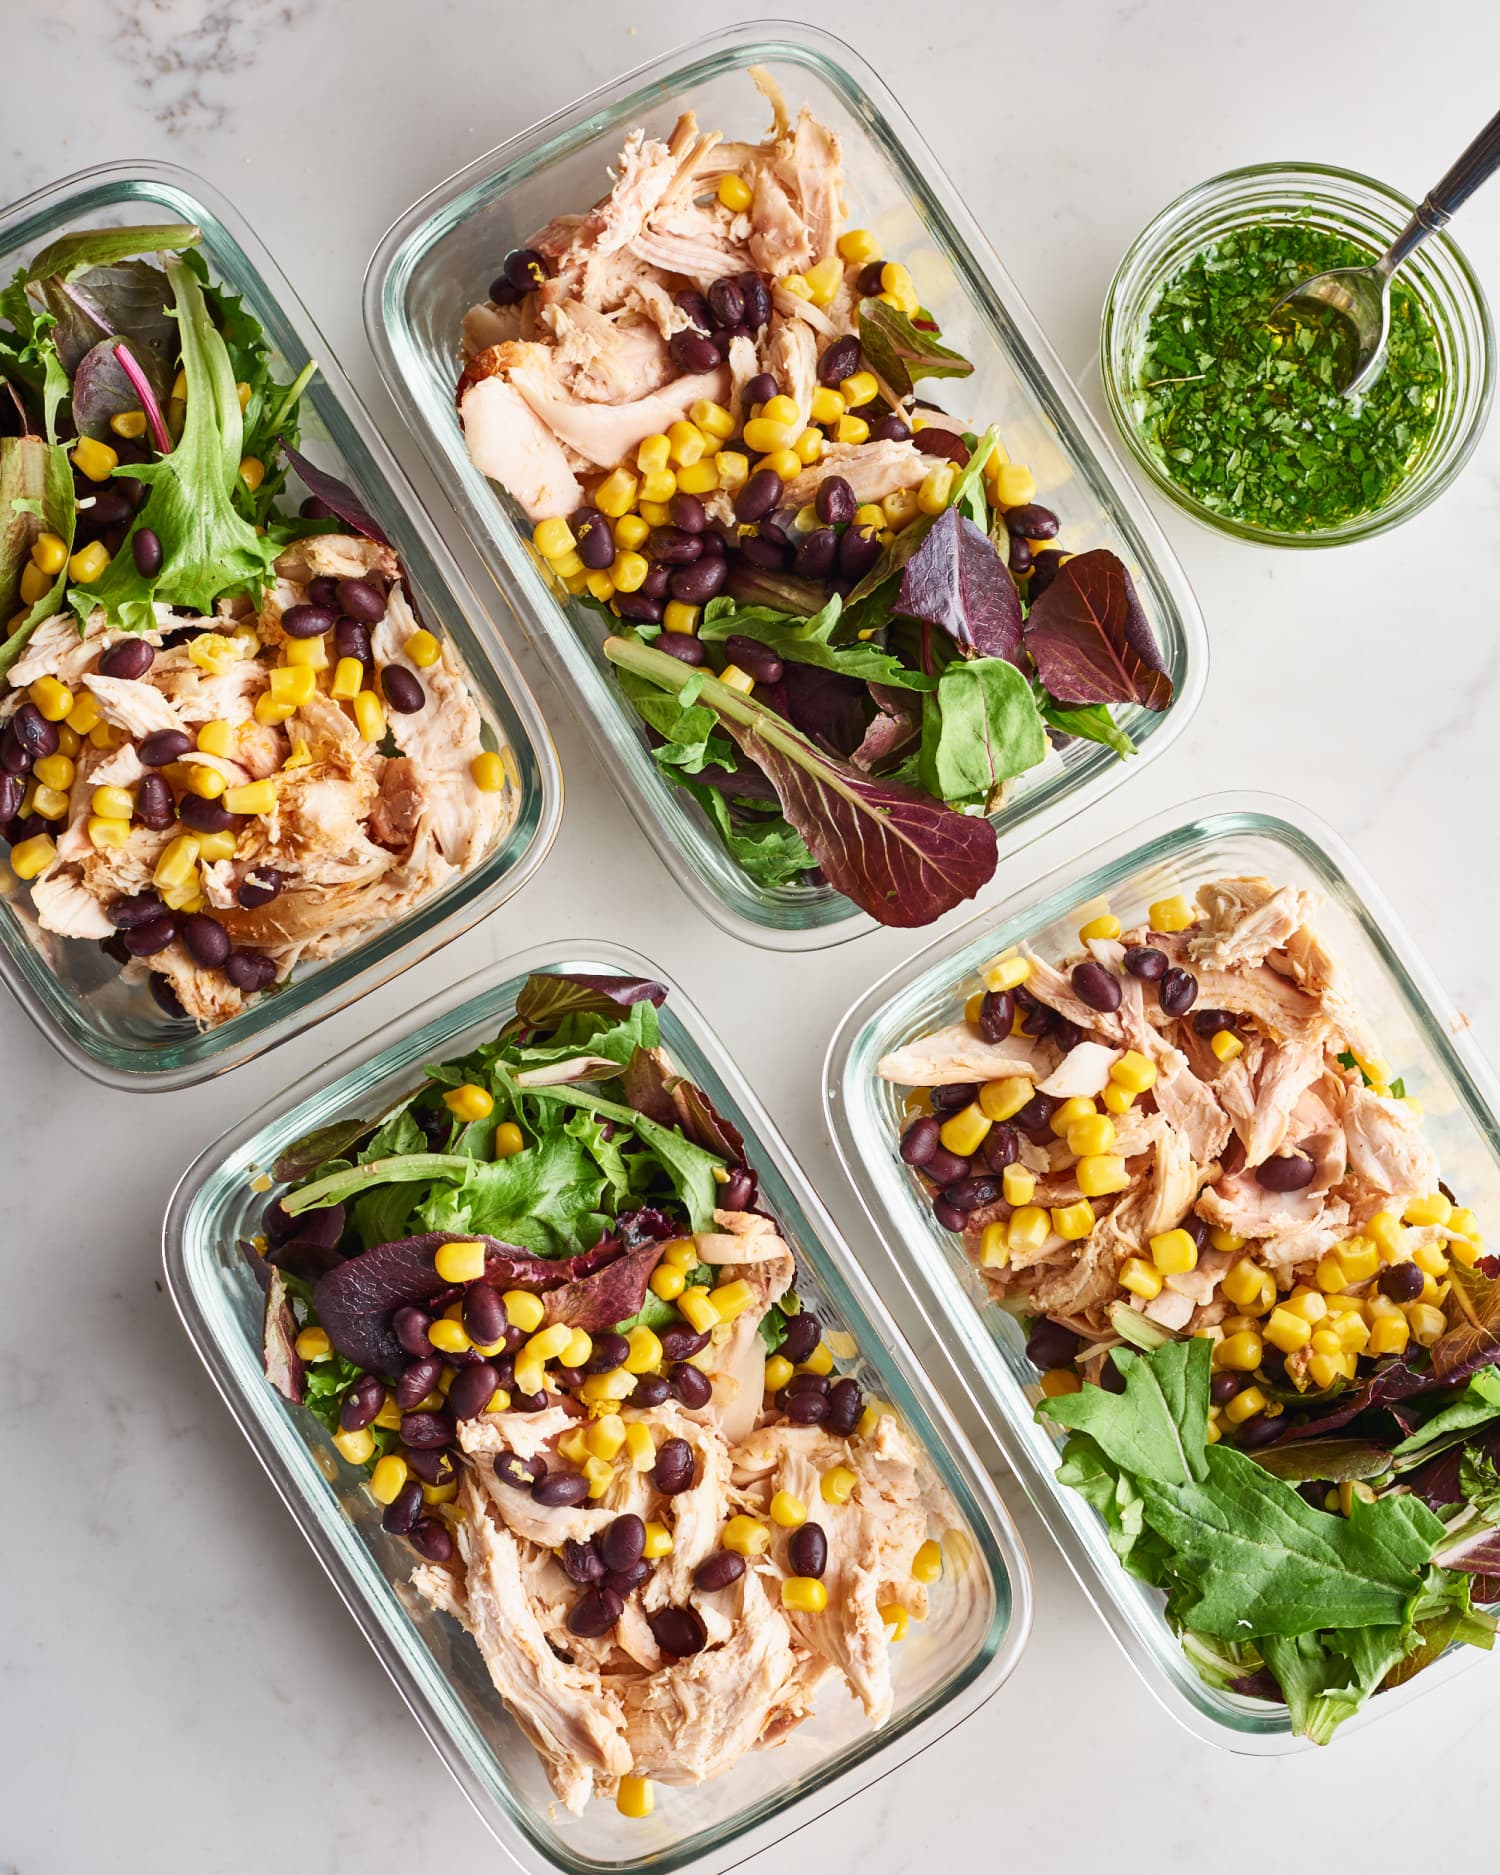 3 Meal Prep Experts Share Their Best Advice on Make-Ahead Lunches